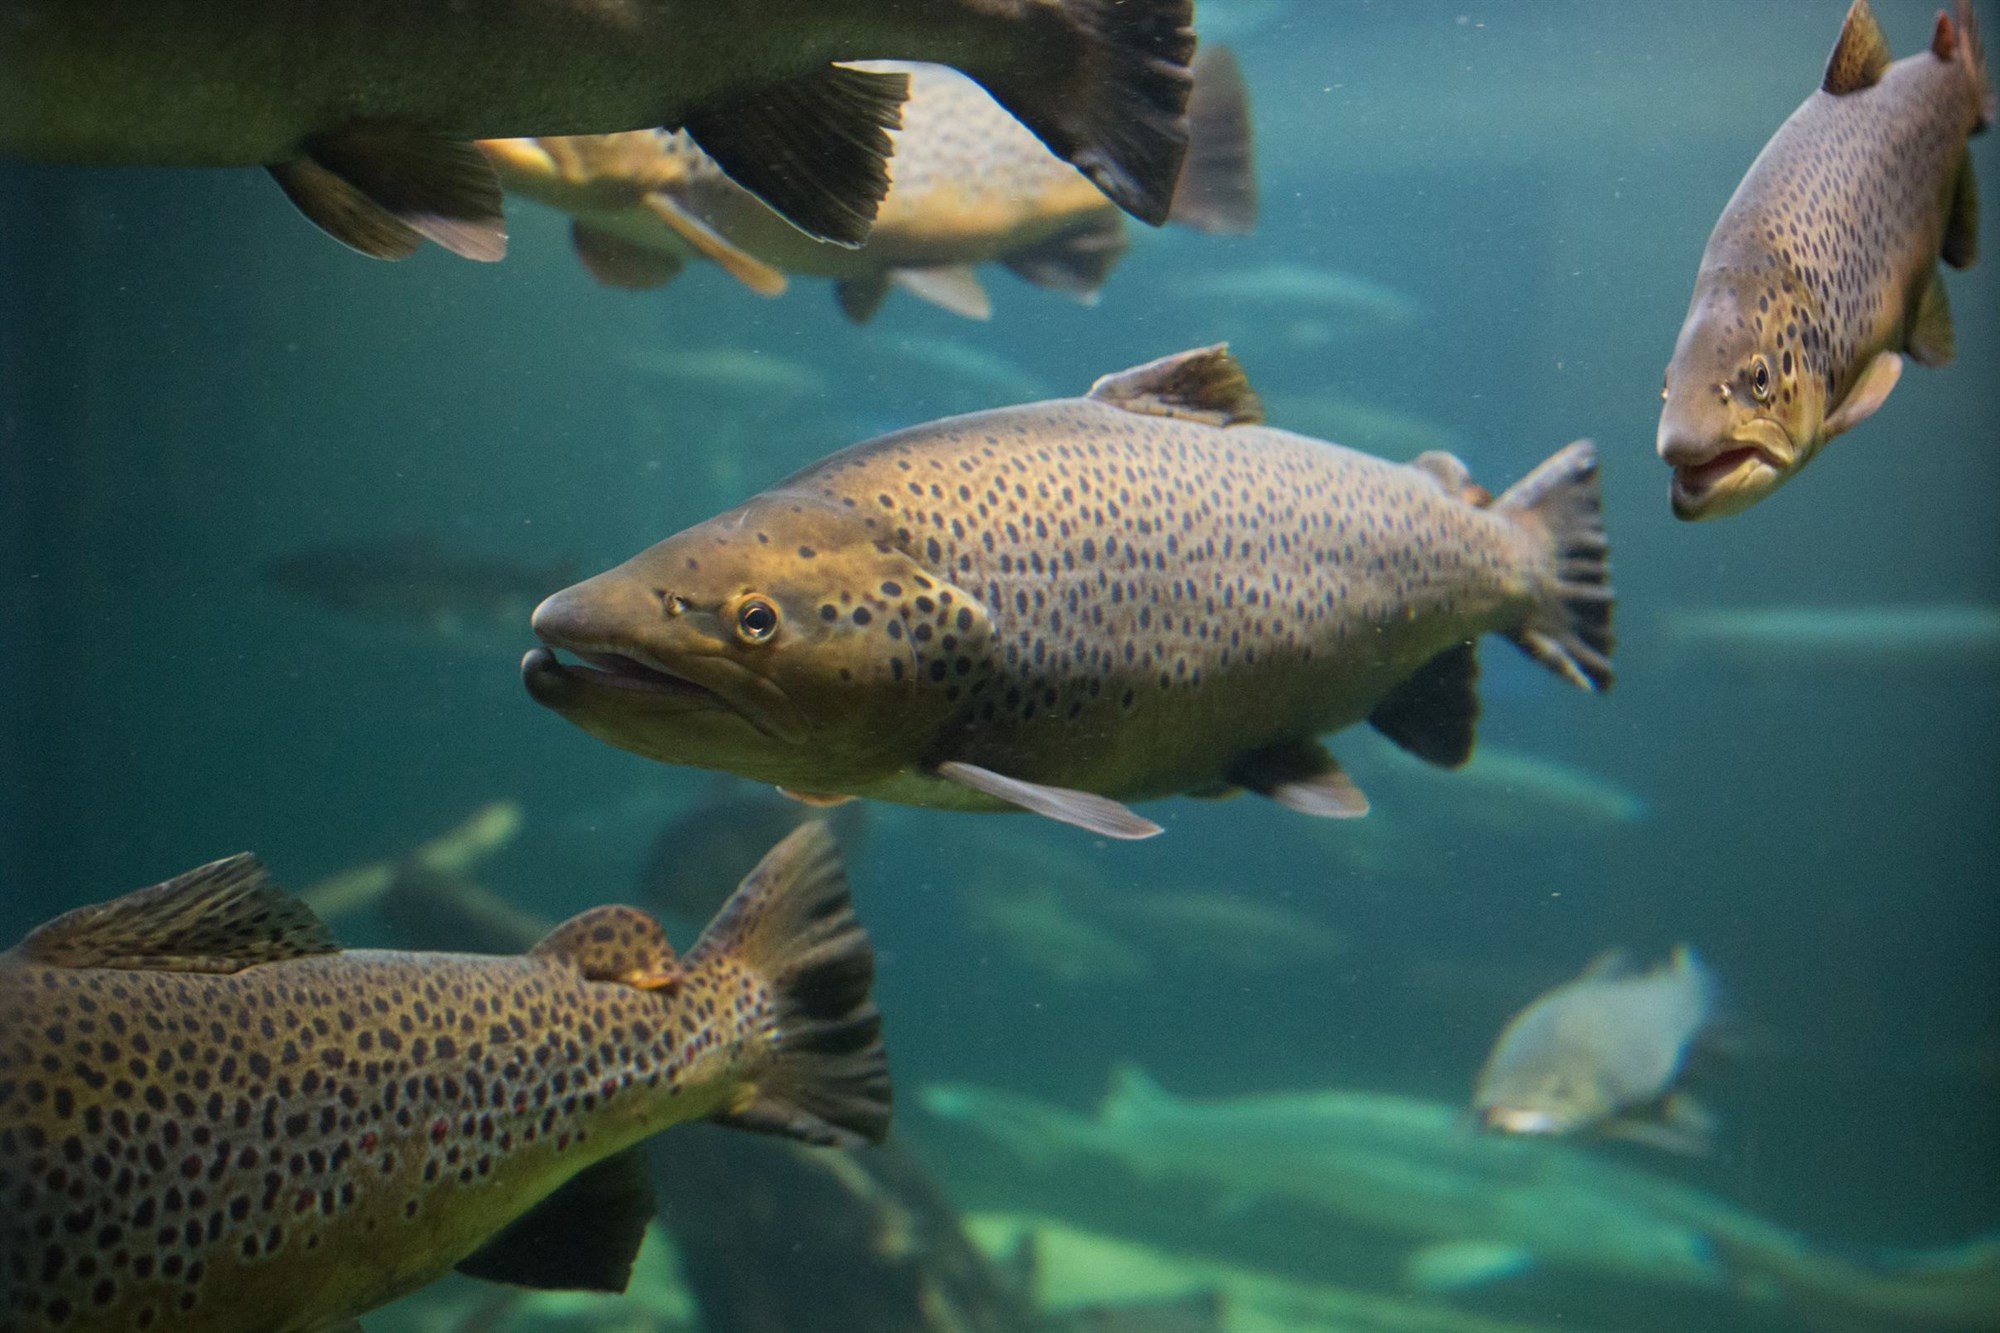 Stress Indicators in Atlantic Salmon Measured with Heart Rate and Swimming Activity